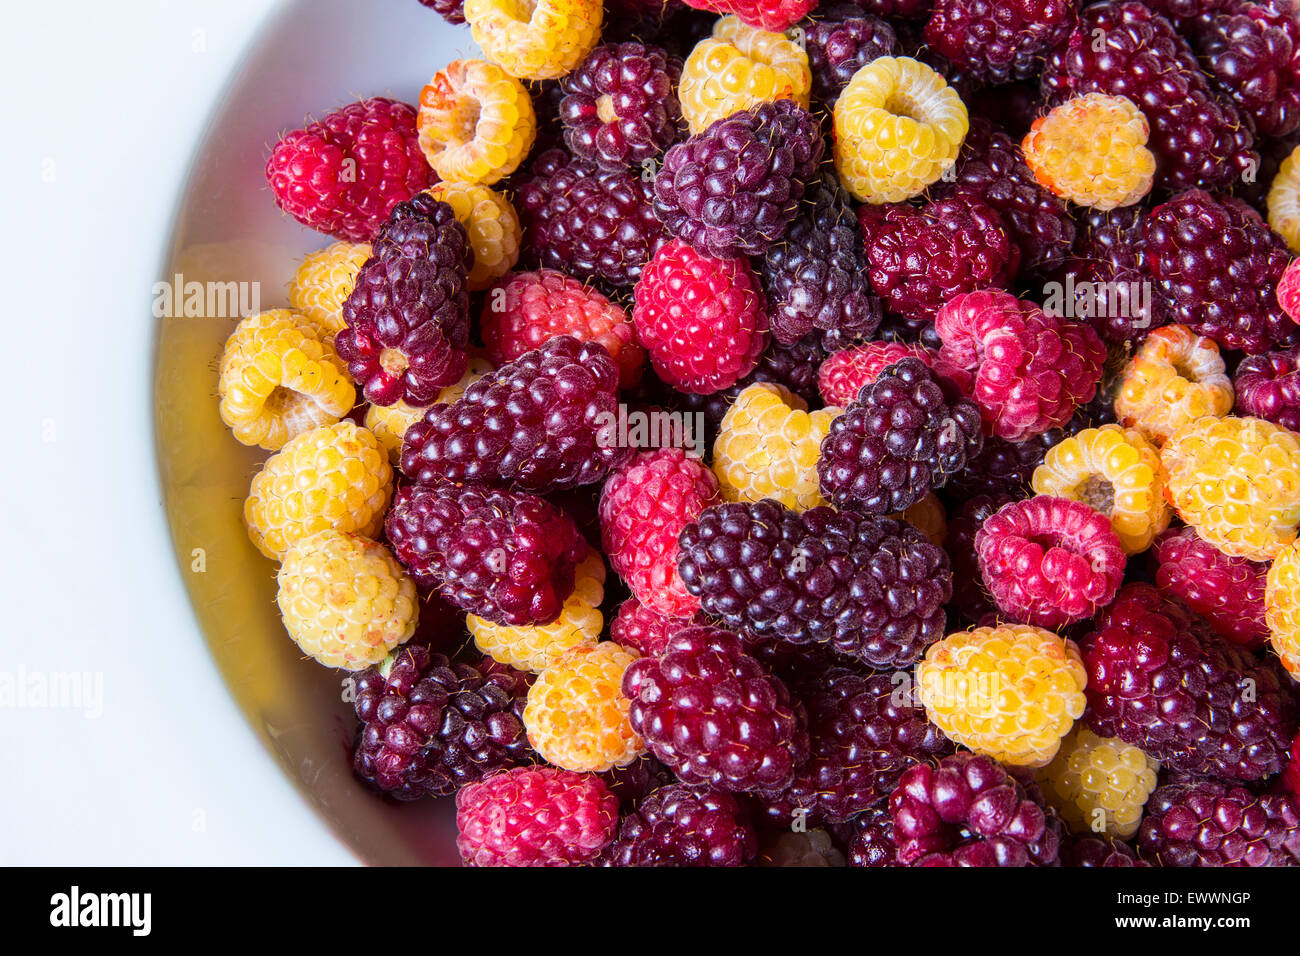 A white bowl of fresh-picked tayberries, red raspberries and yellow raspberries Stock Photo